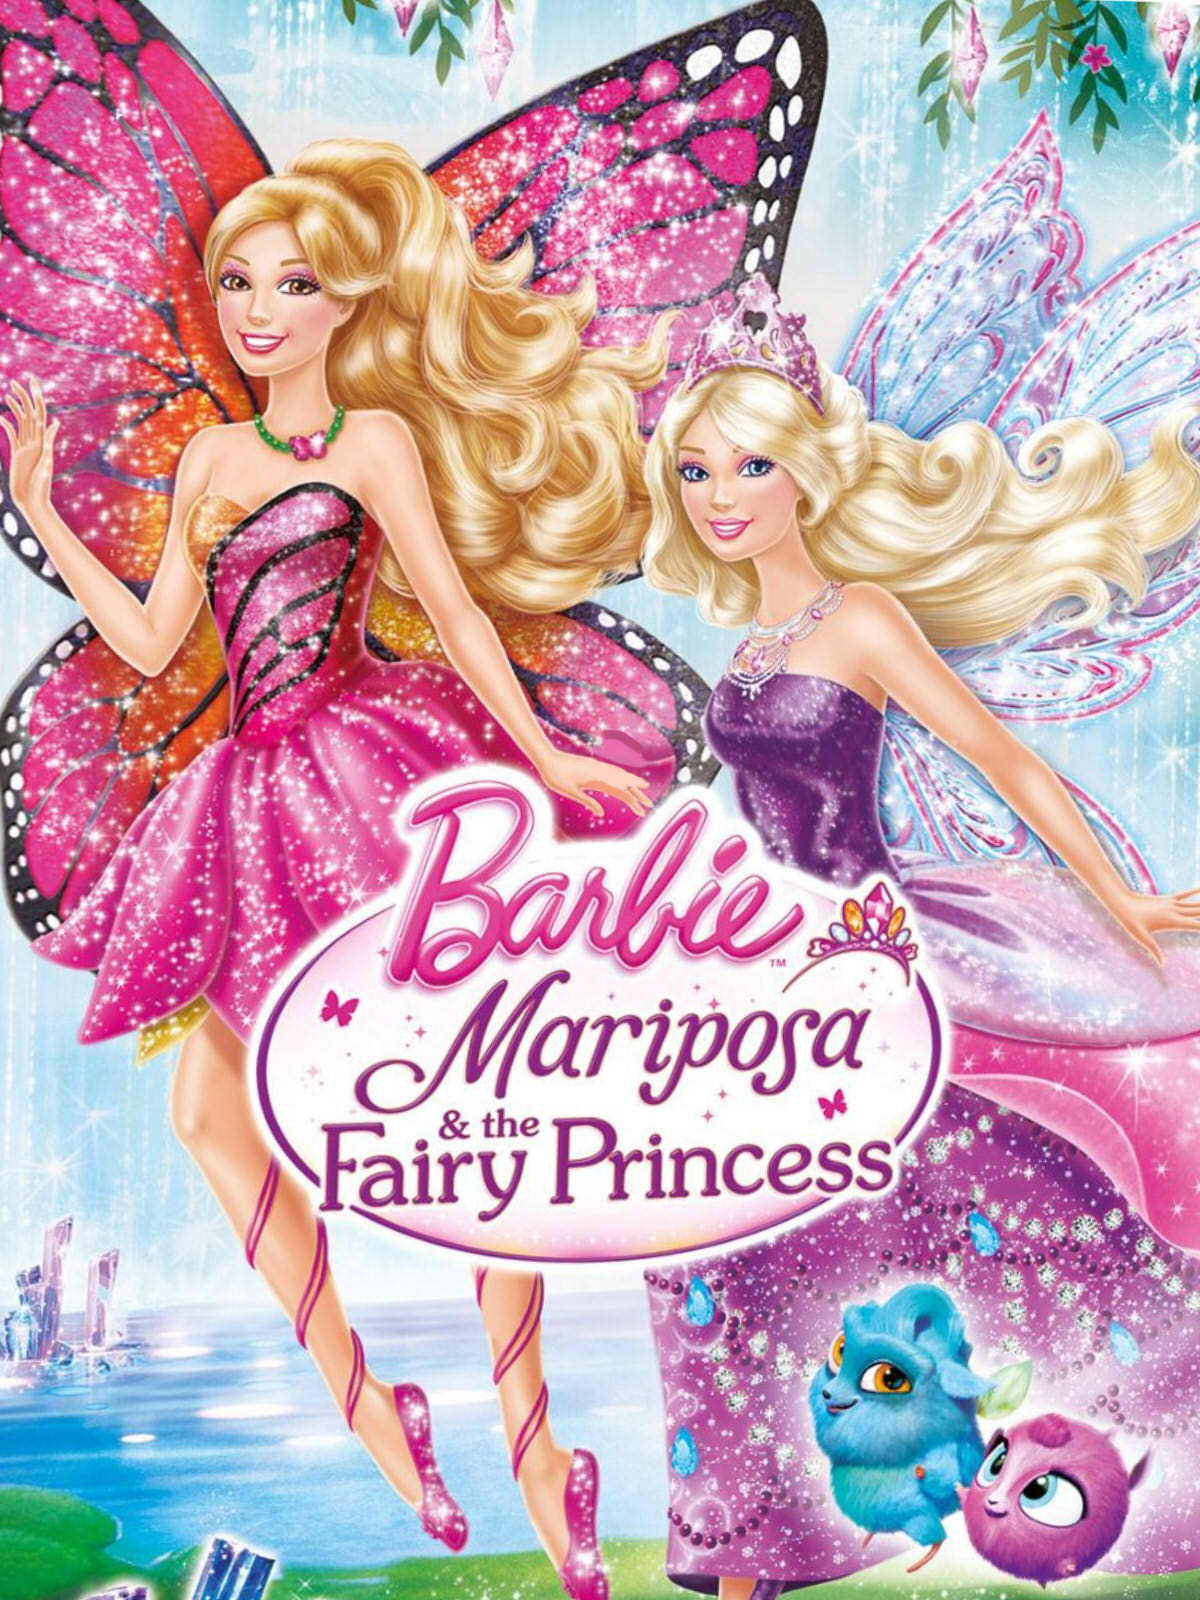 Barbie movies watch for free full movies